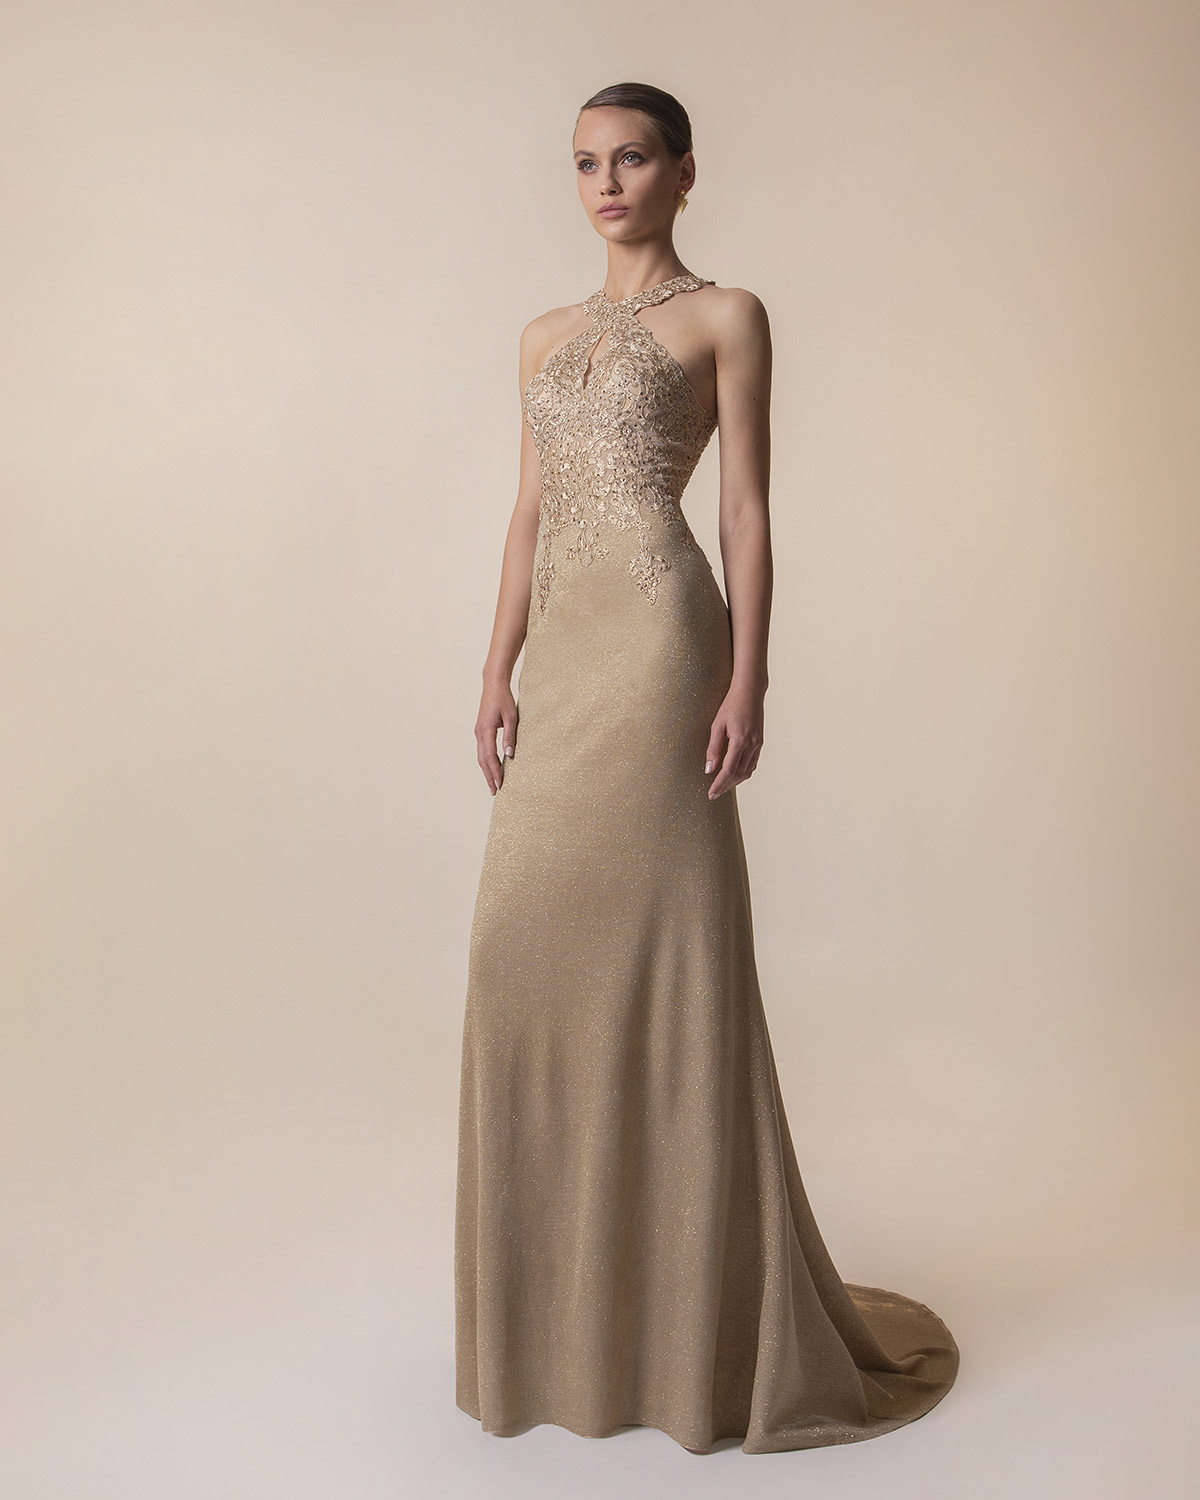 Evening Dresses / Long evening dress with shining fabric and fully beaded top